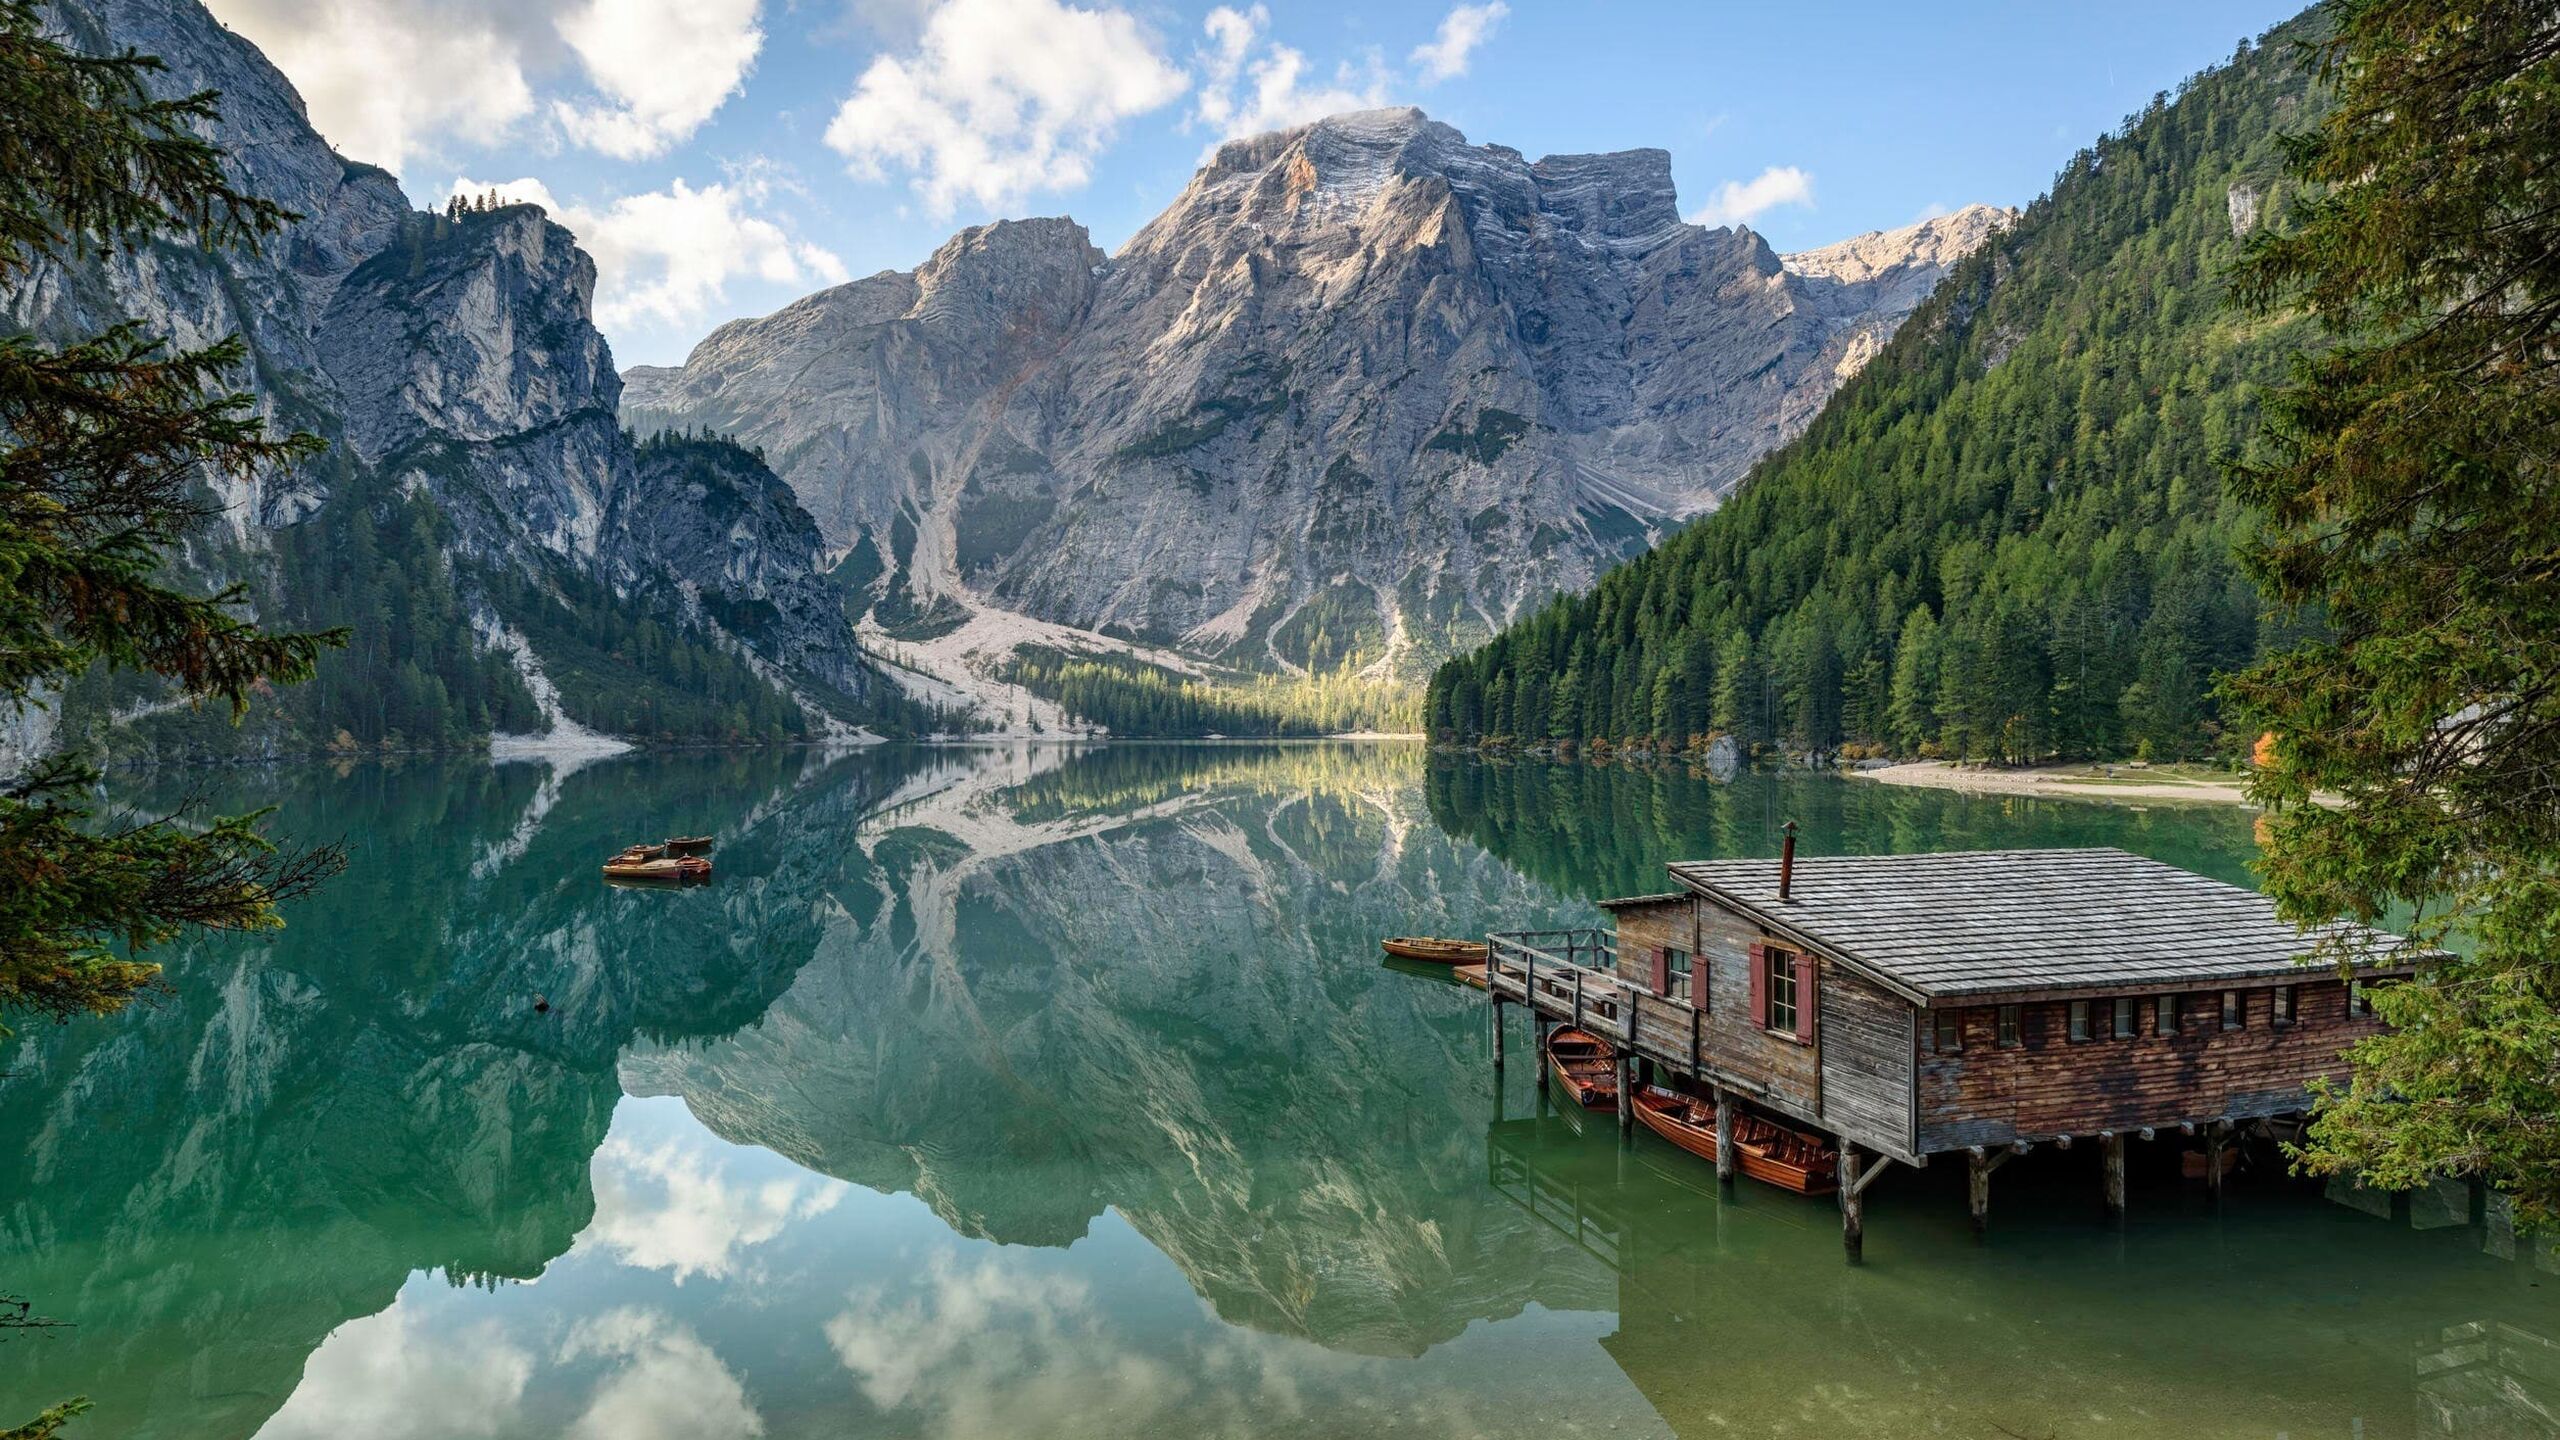 Lake Braies is a destination that cannot be missed when visiting the Dolomites